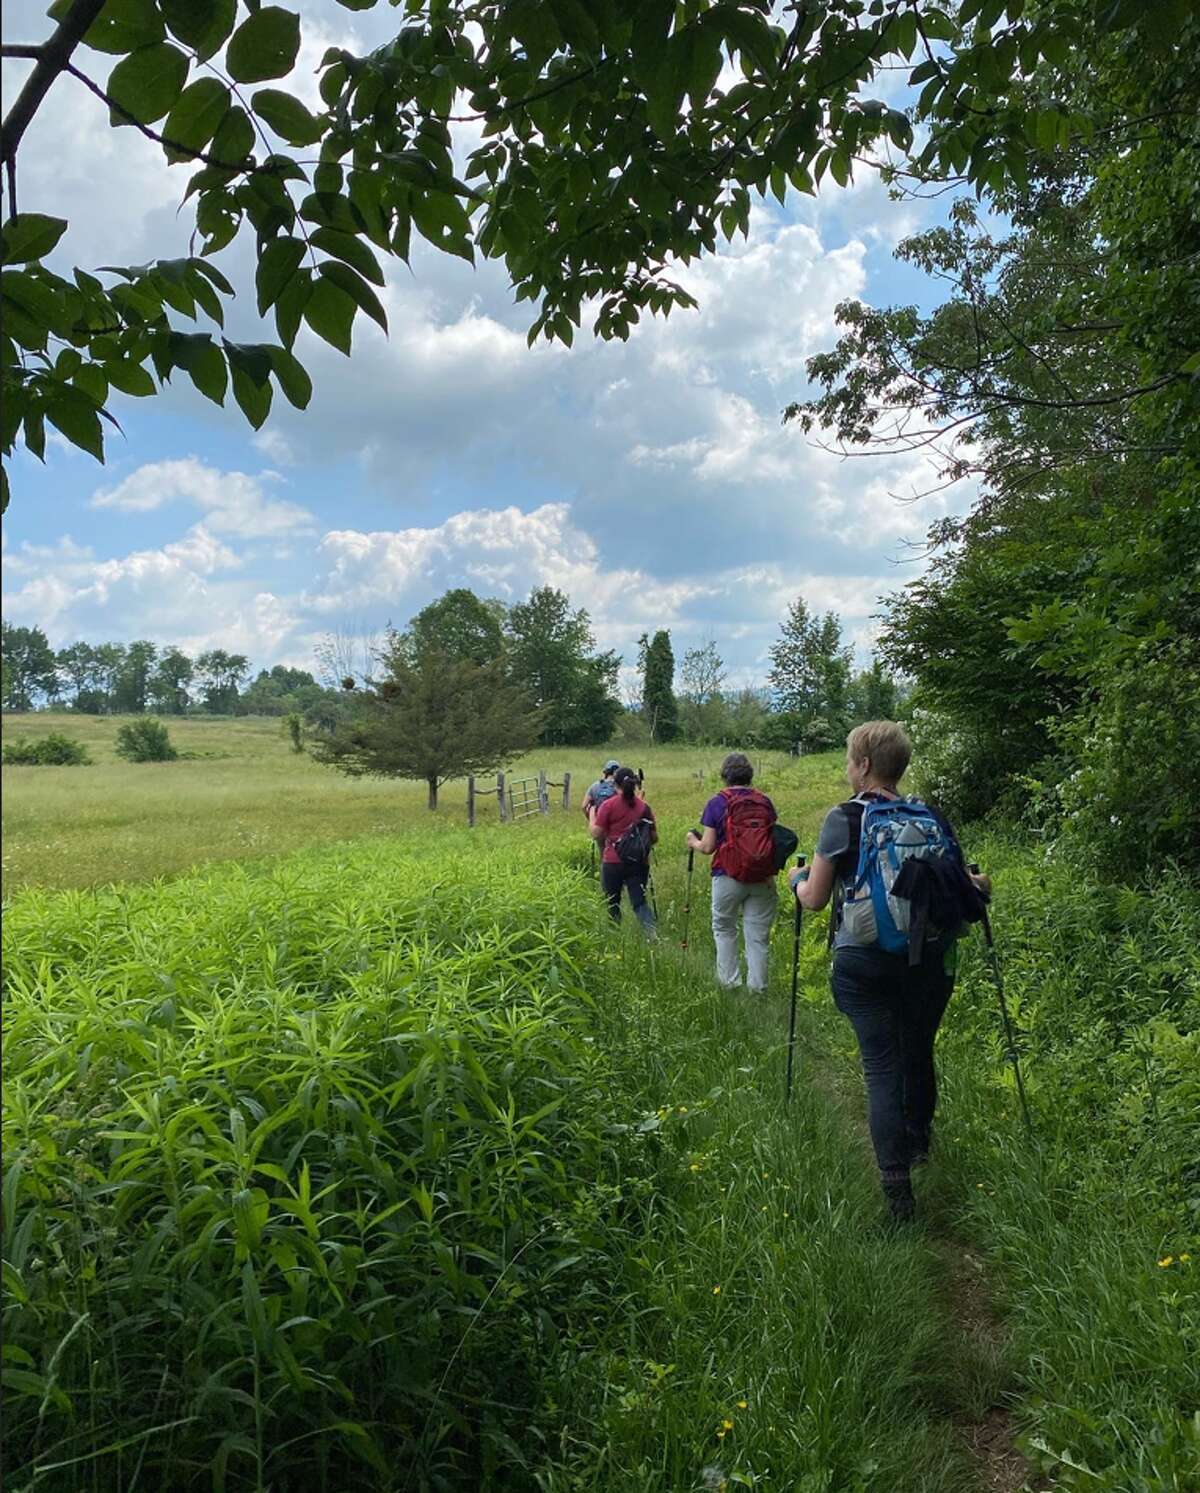 Berkshire Camino’s multi-day journeys are geared toward women 50 and up. Pictured, hikers walk through a meadow during a multi-day hike.